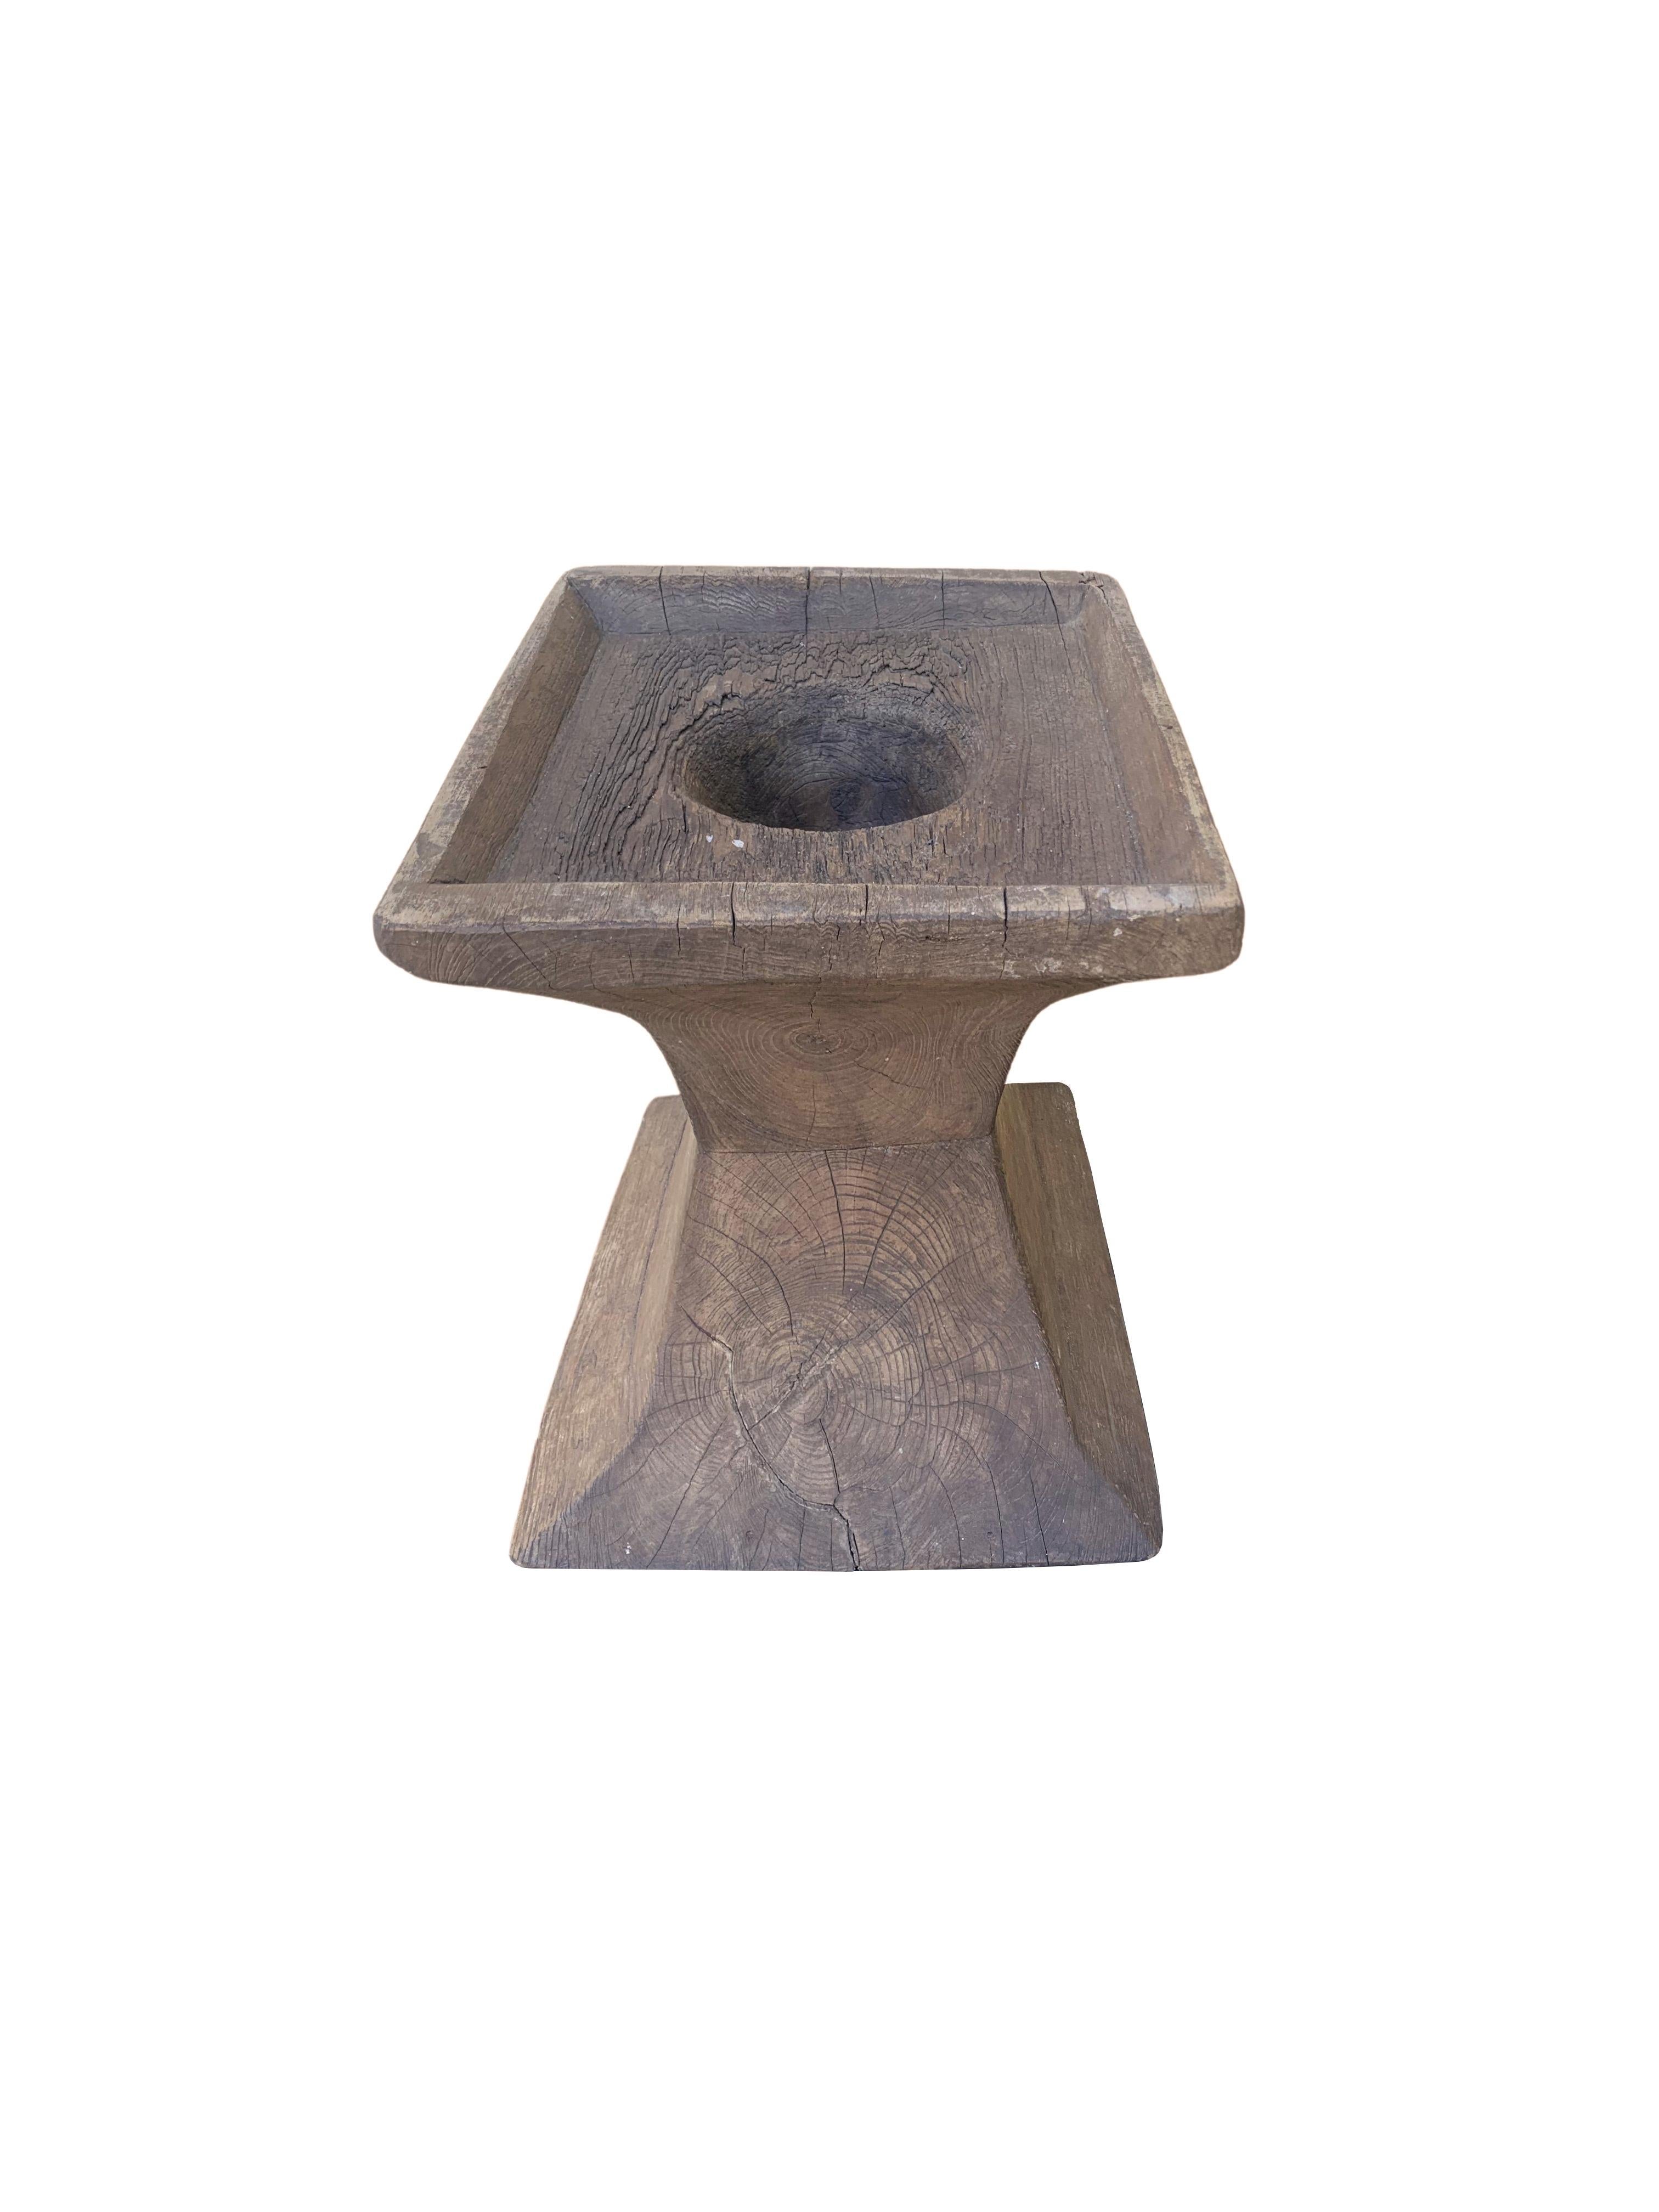 A vintage mortar bowl soured from rural Java & crafted from a solid teak wood slab. A raw and organic object with beautiful wood textures and imperfections. Unique to this mortar is its handle. A versatile decorative object to bring warmth and life